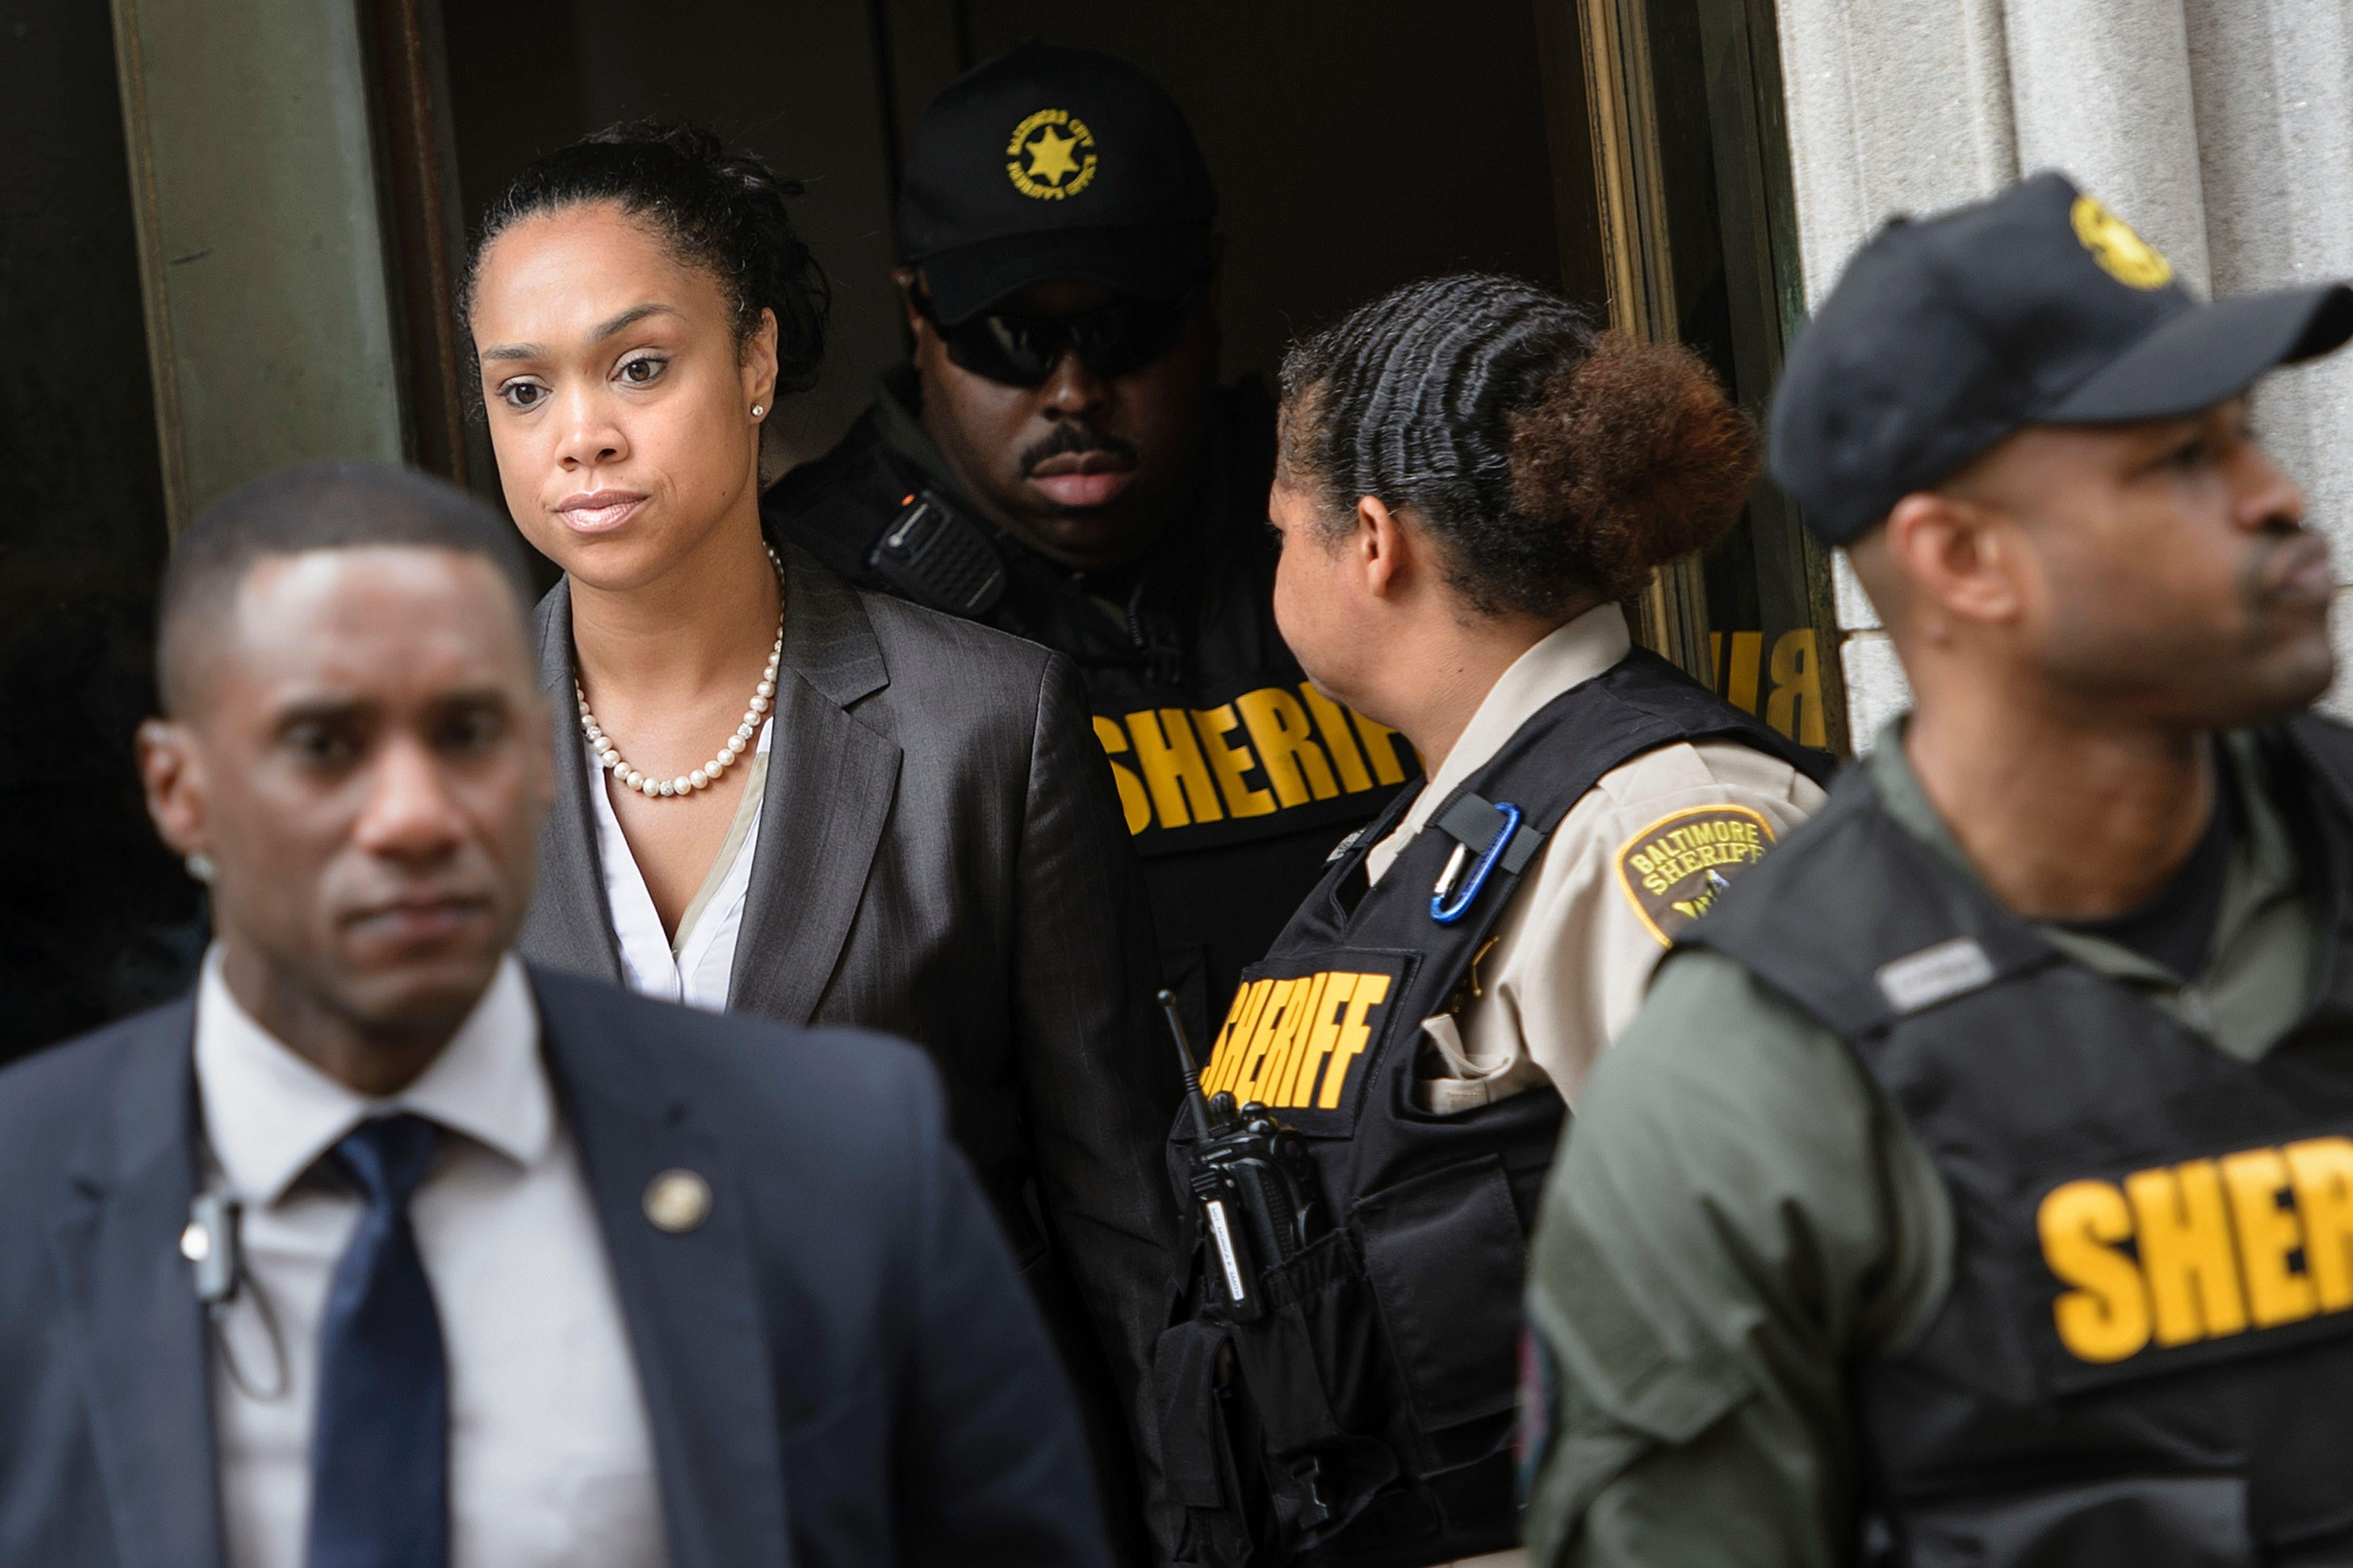 Marilyn Mosby leaves a courthouse surrounded by sheriff's deputies and police